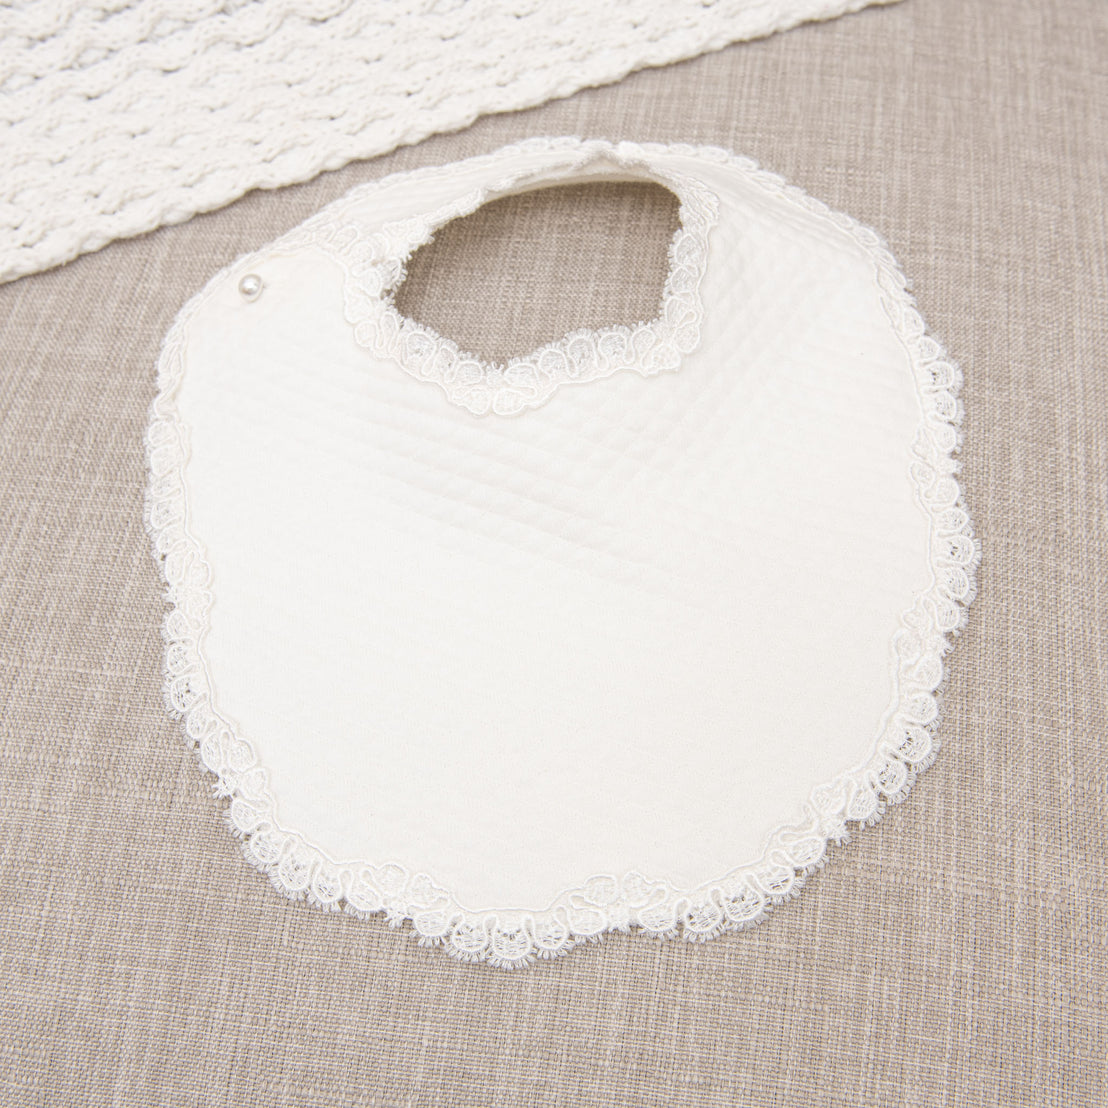 A Madeline Bib with textured fabric and delicate lace trim, displayed on a neutral-toned cloth background.